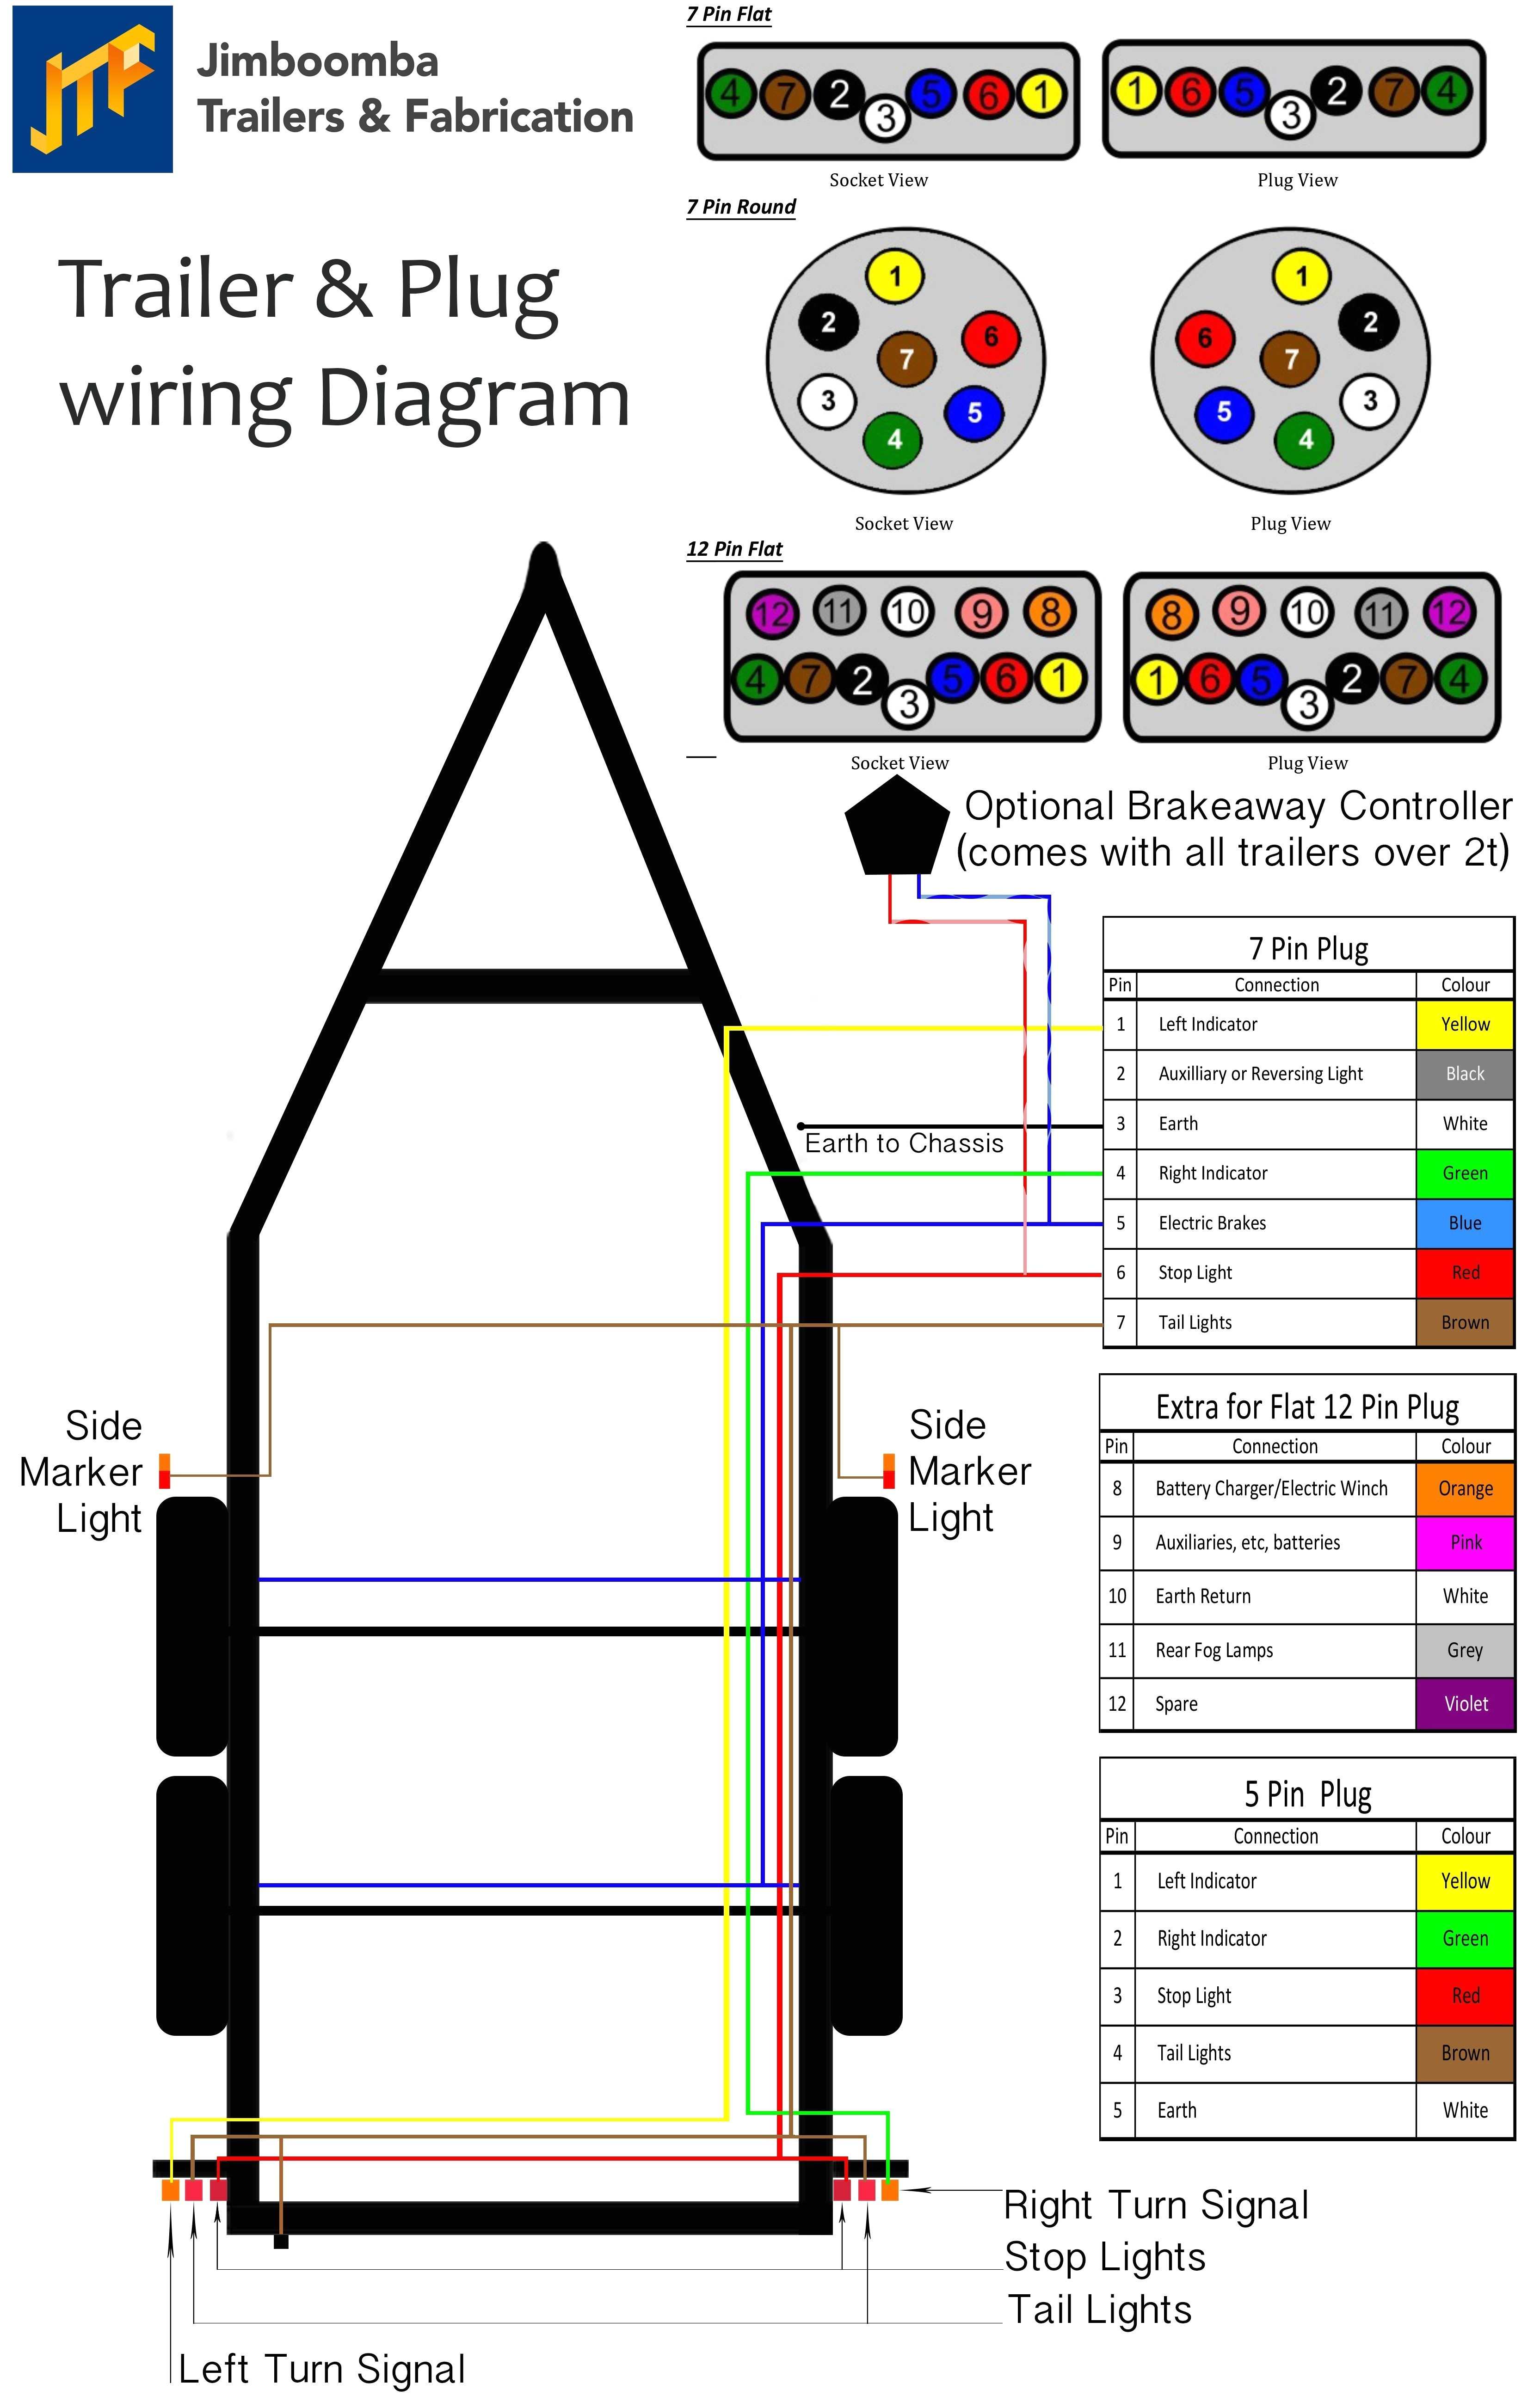 6 pin square camper wiring harness wiring diagram article review 6 pin square plug wire diagram